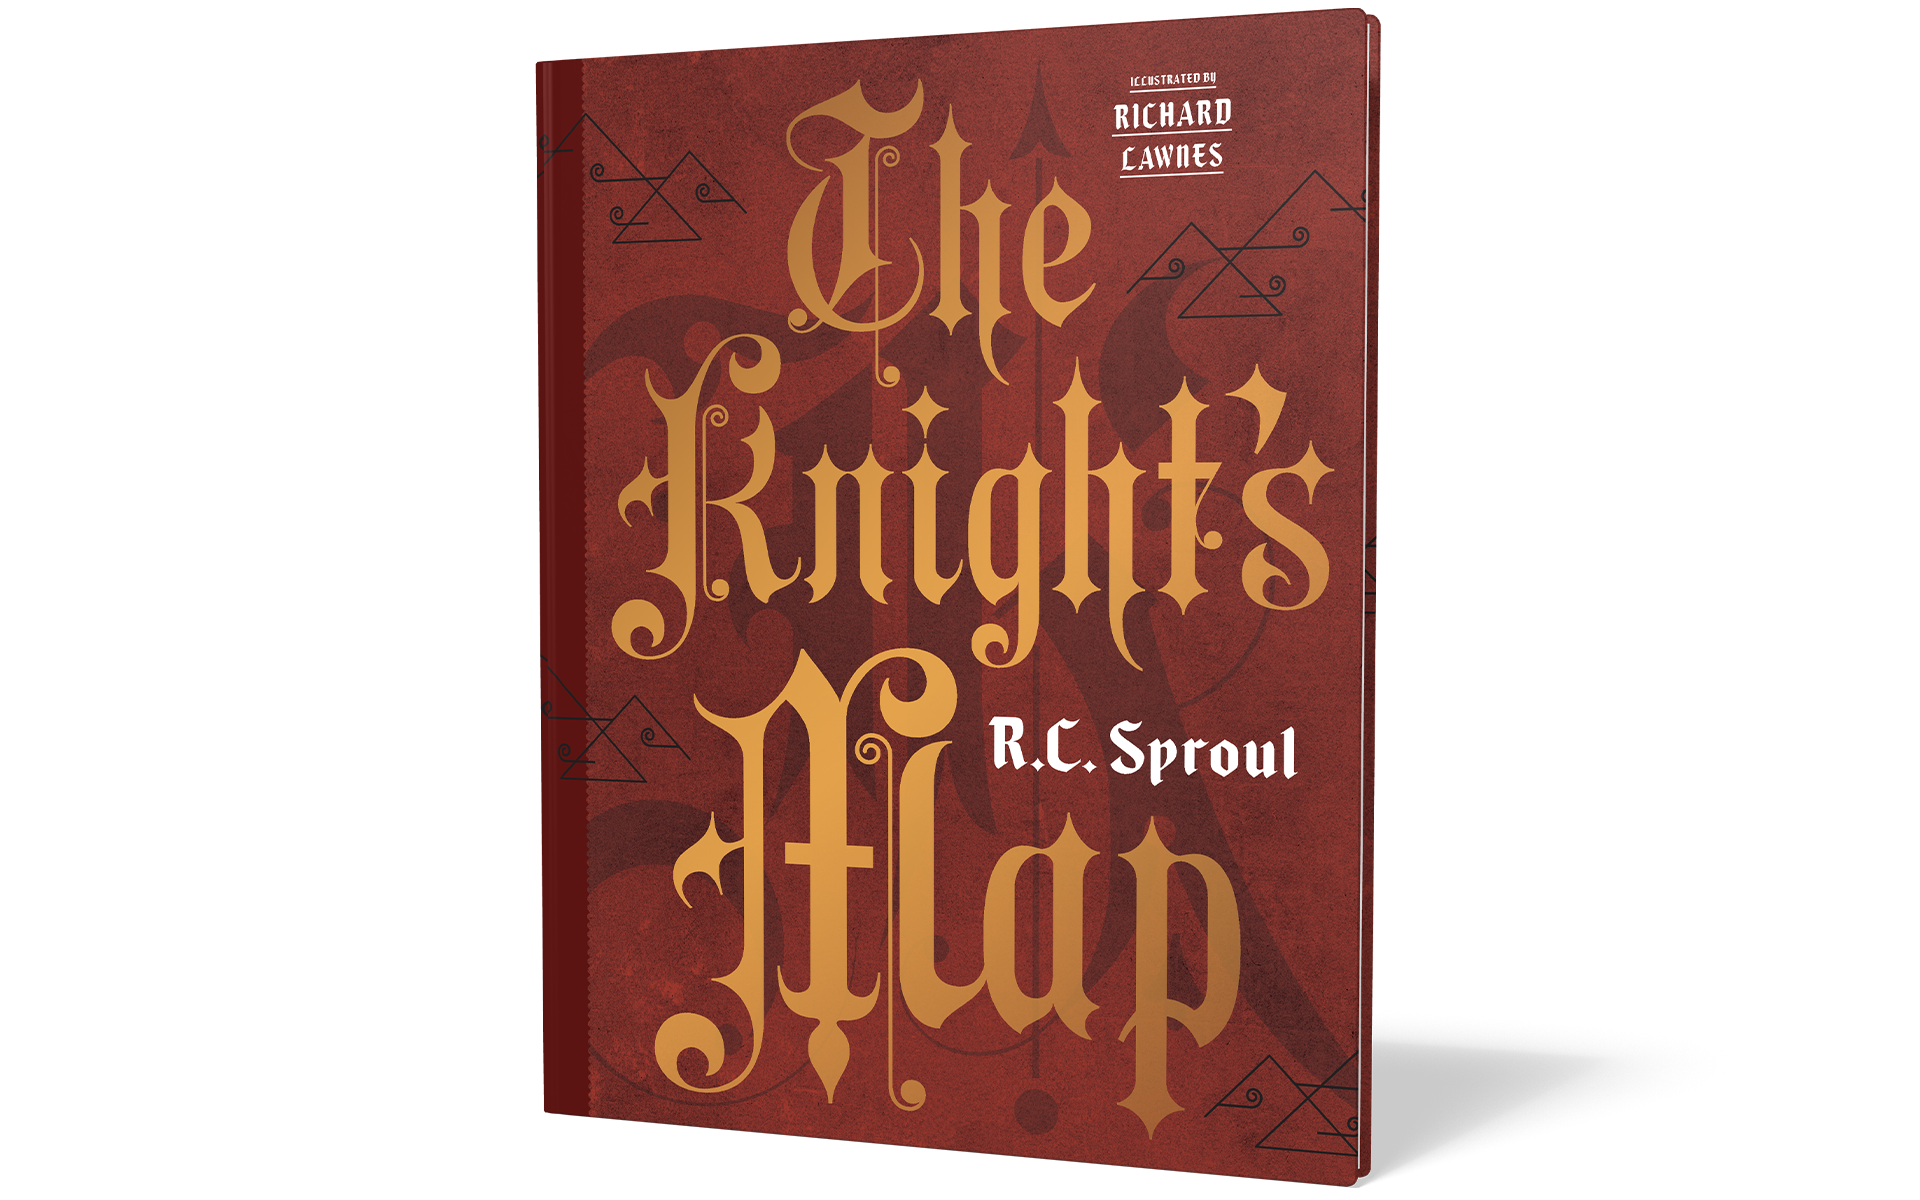 The Knight's Map